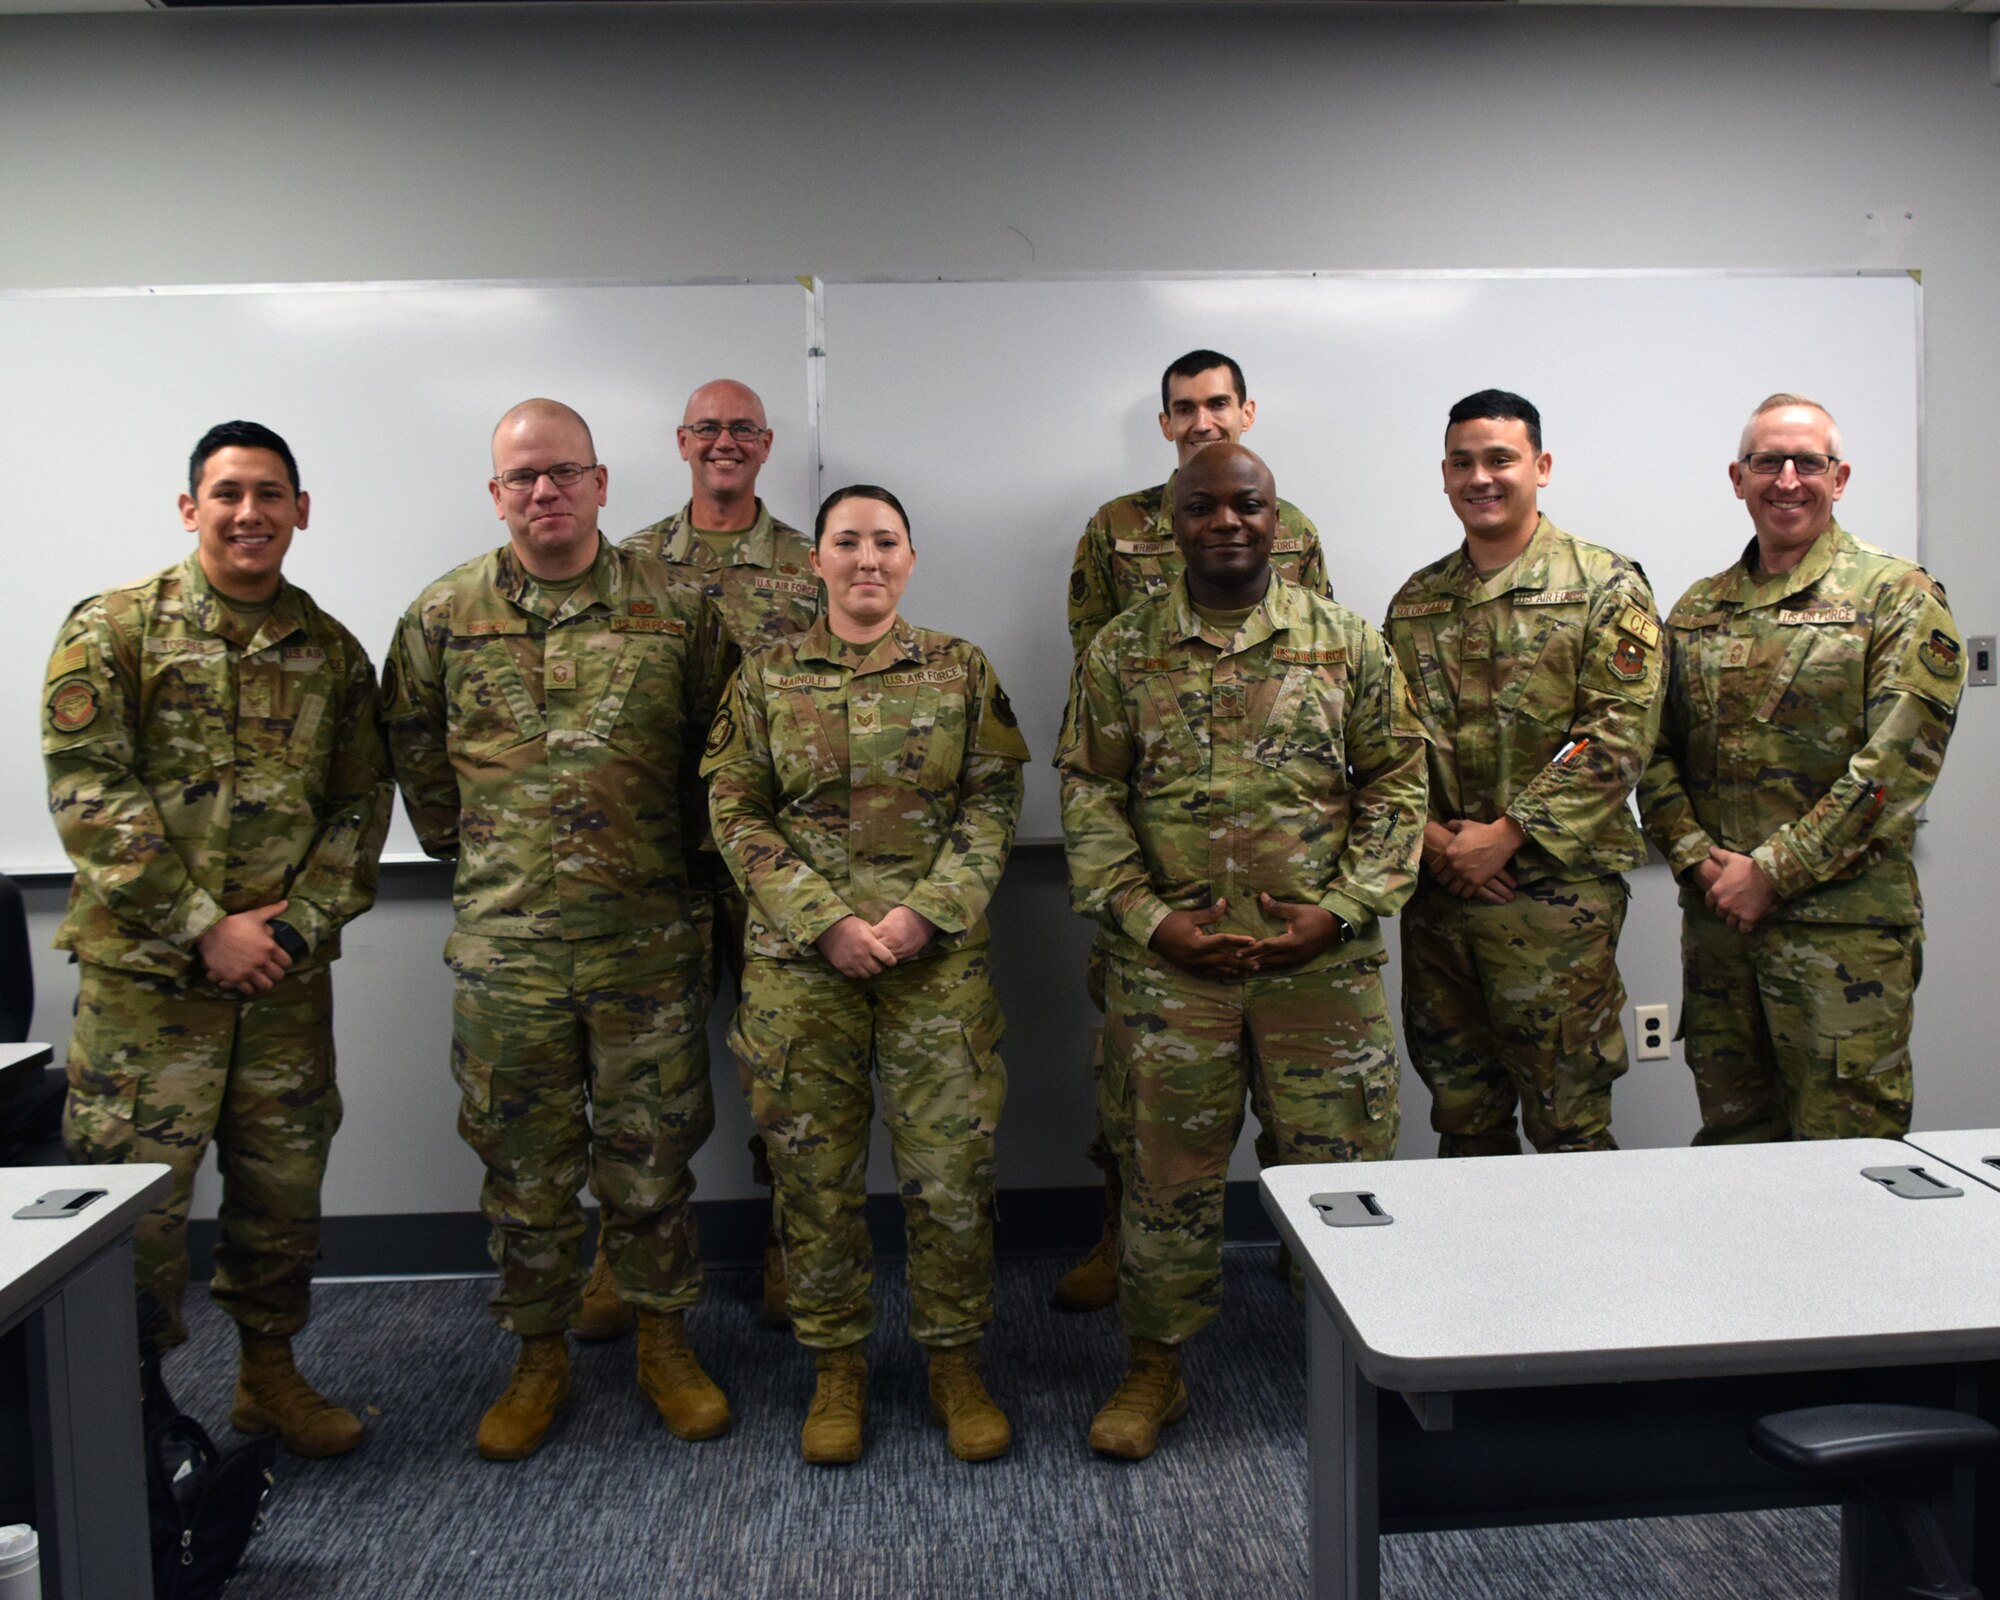 The Air Force Institute of Technology hosted three enlisted faculty members from the United States Air Force Academy on 17 October. The goal of the visit was to educate current AFIT enlisted master’s students about opportunities to teach at the Academy.  Front row: Staff Sgt. Steven Torres, AFIT master’s student, Master Sgt. James Earley, USAFA instructor, Technical Sgt. Lauren Mainolfi, AFIT master’s student, Technical Sgt. Nana Hene, AFIT master’s student, Technical Sgt. Jesse Solorzano, AFIT master’s student, and Chief Master Sgt. William Baez, USAFA assistant professor. Back row: Chief Master Sgt. Michael Deiderich, USAFA instructor and Technical Sgt. Mason Wright, AFIT master’s student. (U.S. Air Force photo by Katie Scott)